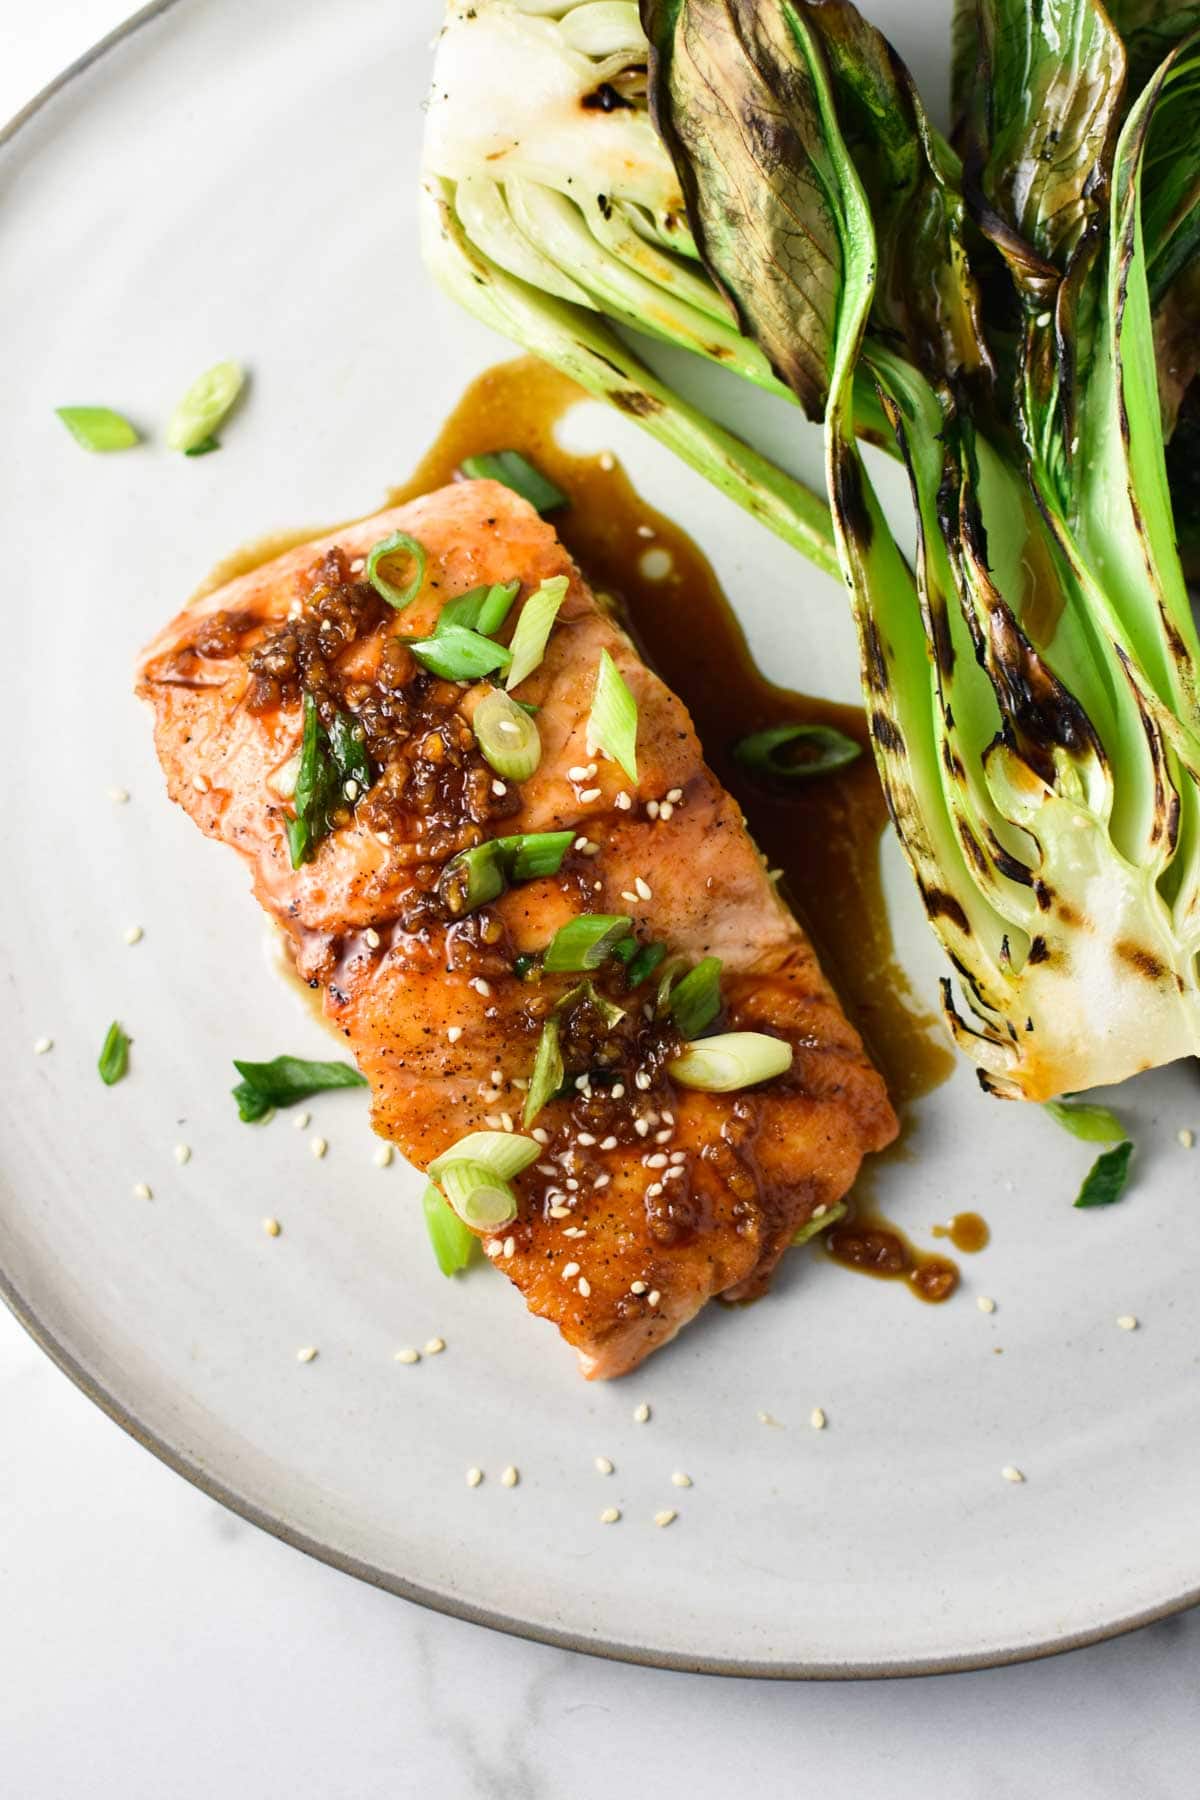 A fillet of salmon brushed with a teriyaki glaze next to a grilled bok choy.